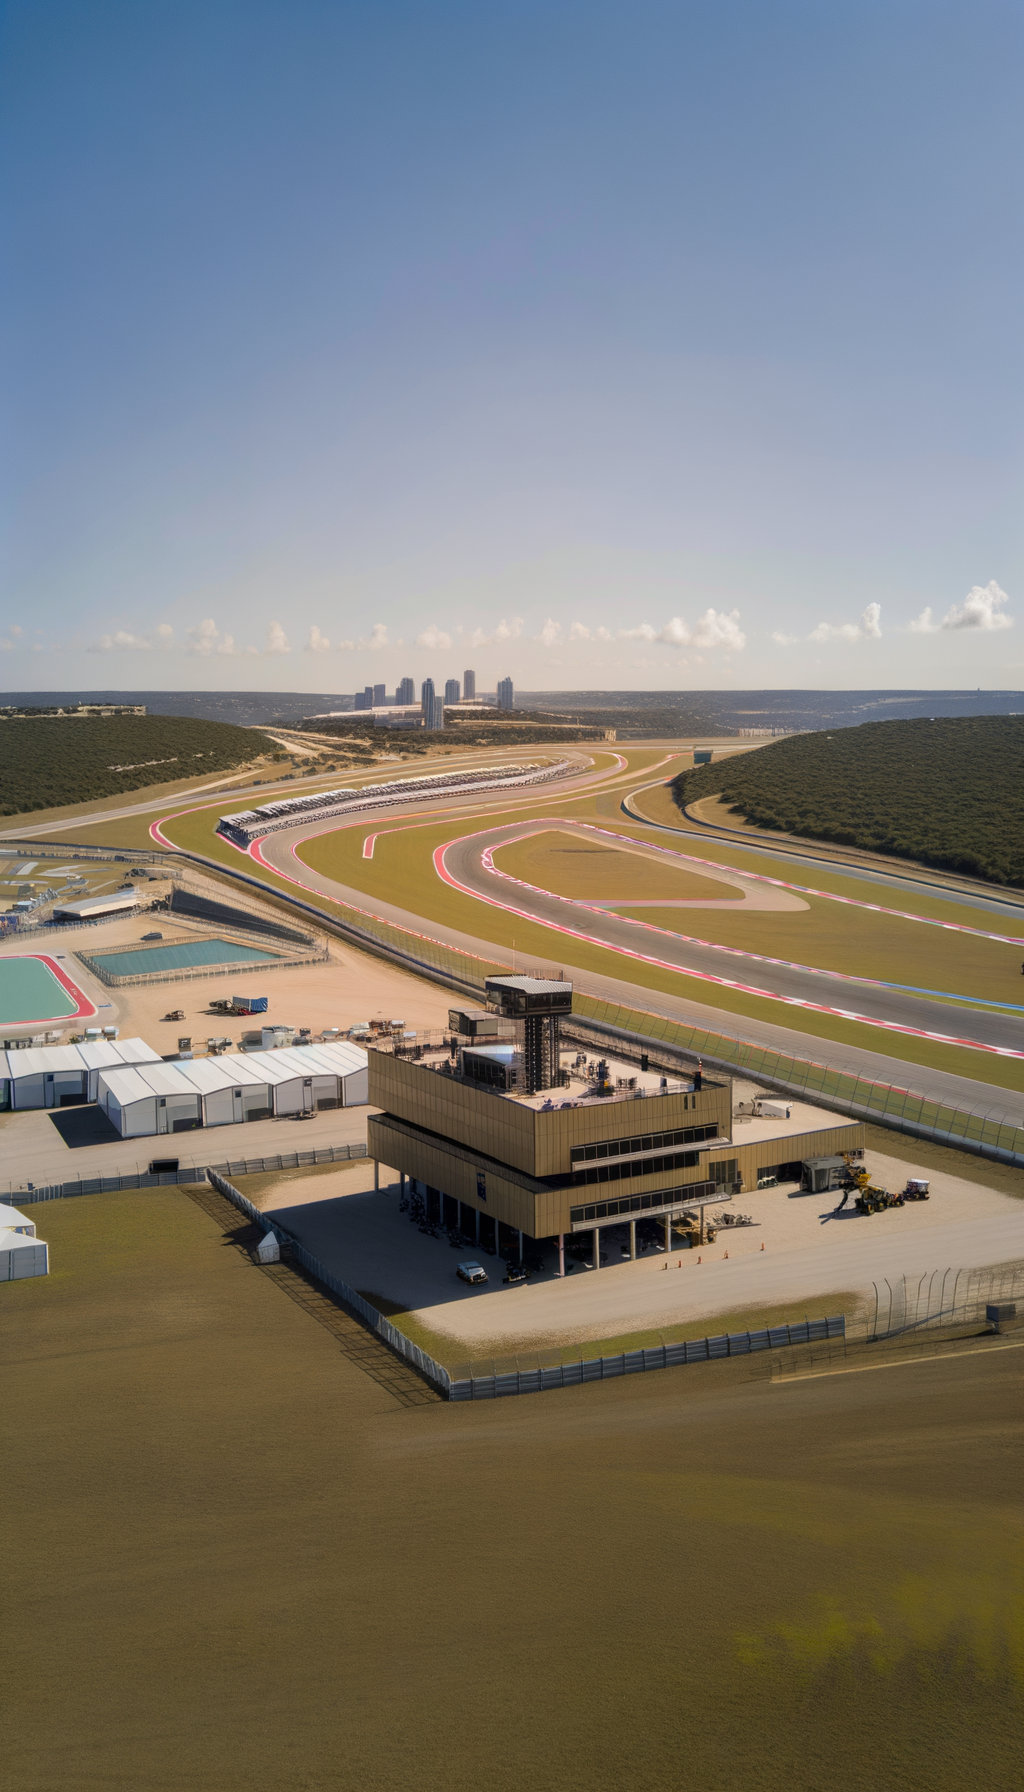 Unit 2101 at the Circuit of the Americas (COTA) in Austin, Texas, is undergoing a spectacular transformation, setting new standards for world-class entertainment and motorsport experiences. Slated to begin in July 2024 and conclude by September of the same year, this $550,000 renovation project will expand operational capabilities with 3,000 square feet of designed space for office and storage needs. Discover how this development, driven by T-11 Concourse LLC and Merriman Anderson Architects, Inc., is accelerating COTA's future into the fast lane of innovation and excitement – read the full article for all the electrifying details.